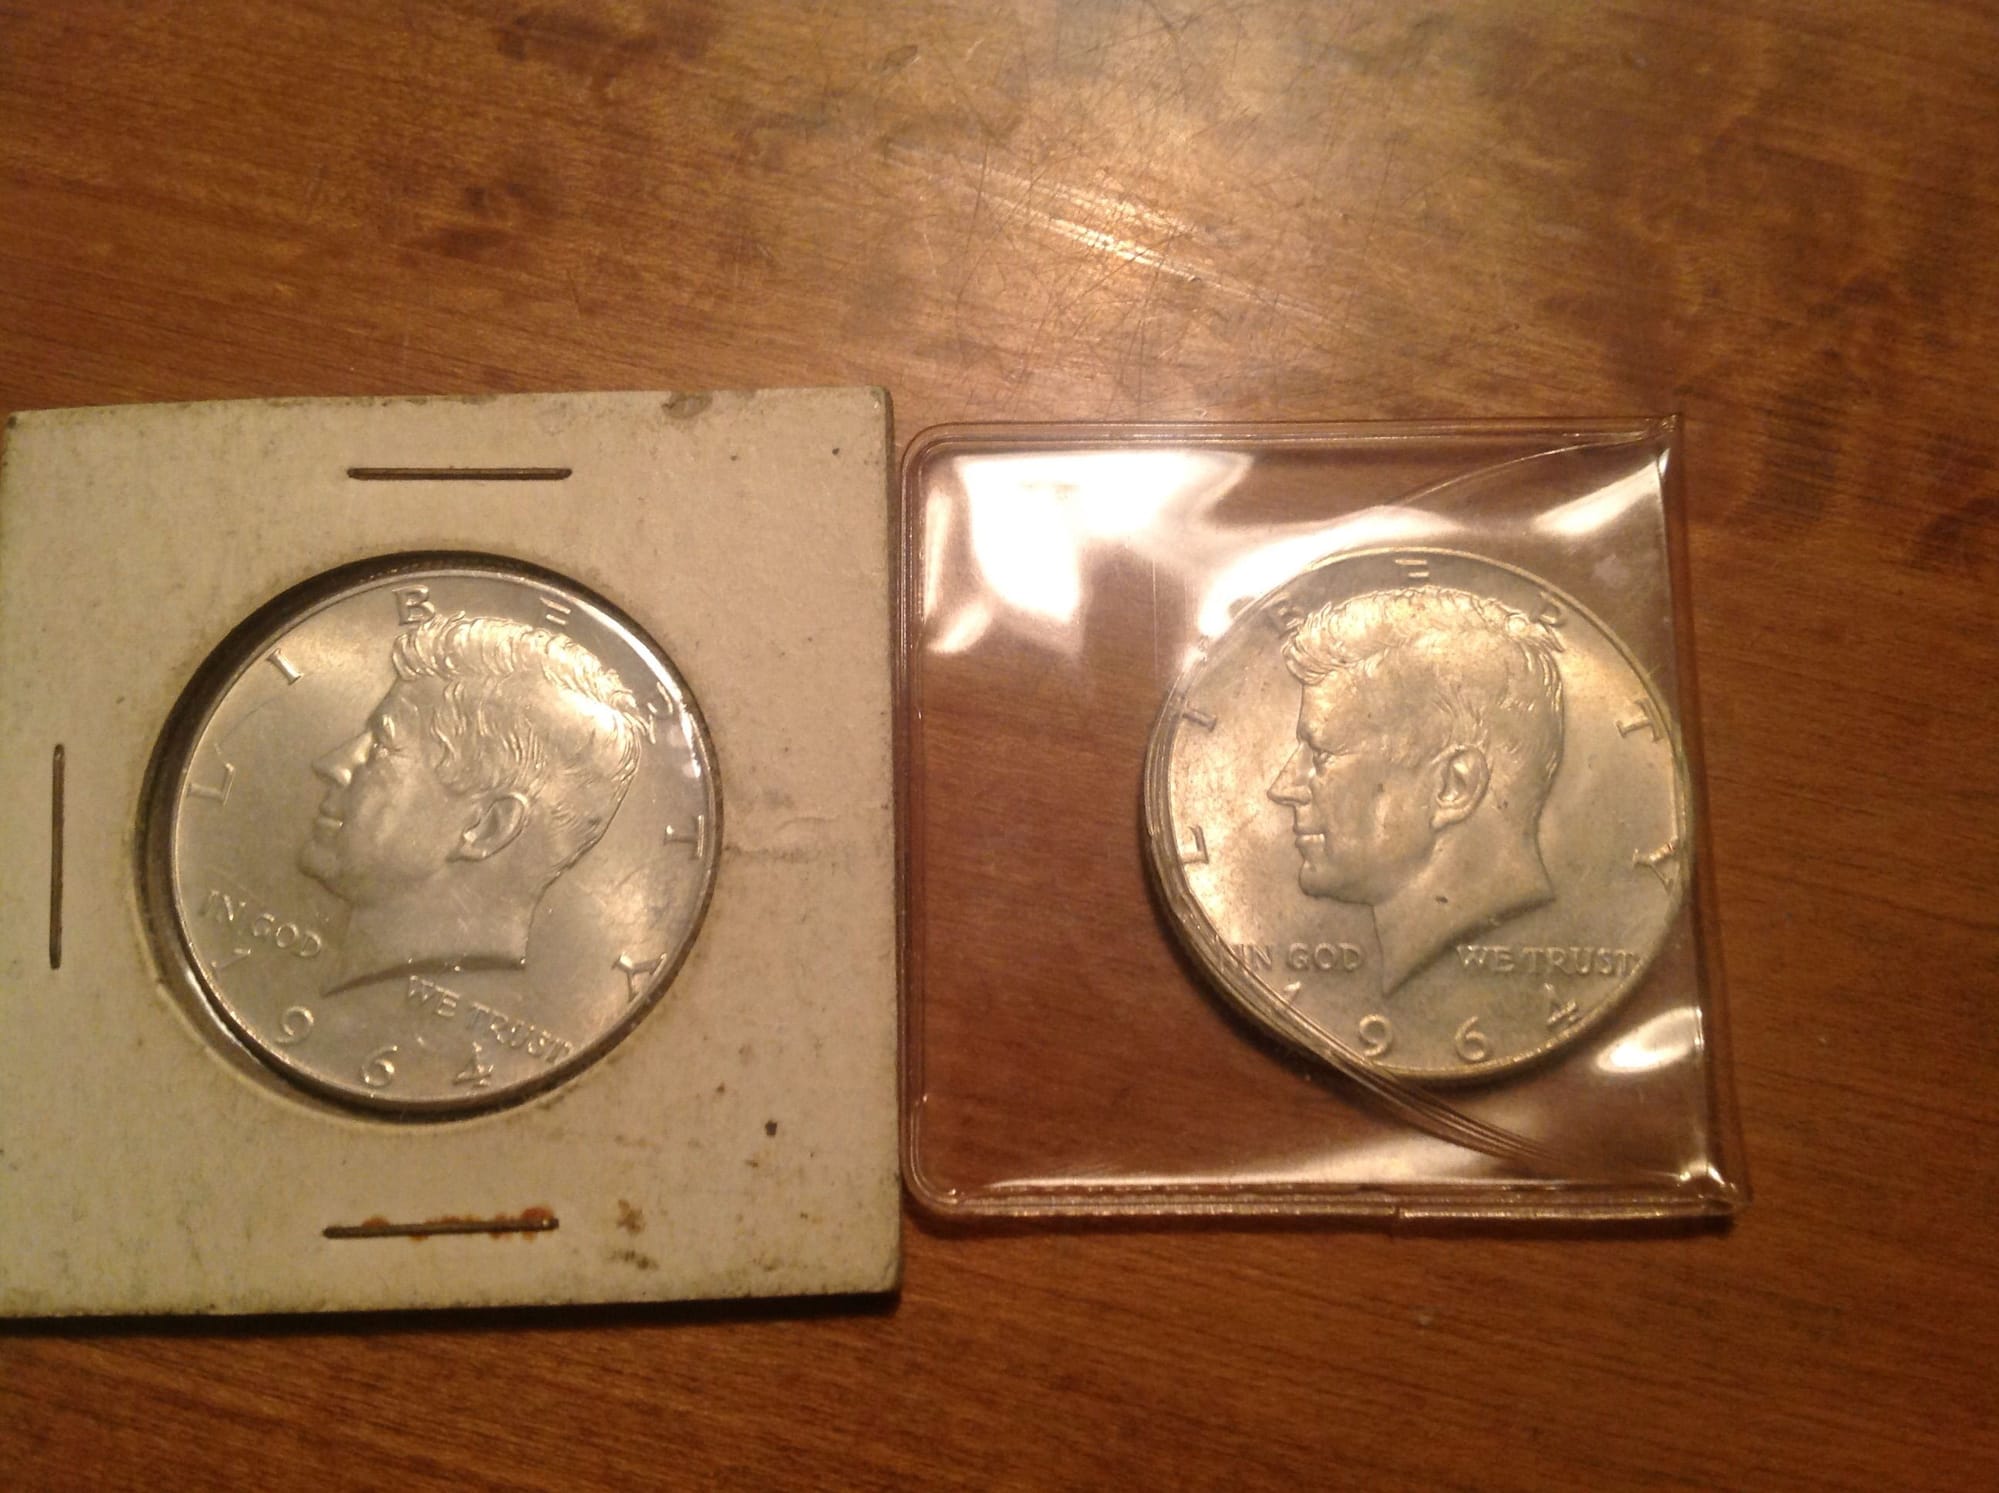 What quarters are worth more than their face value?